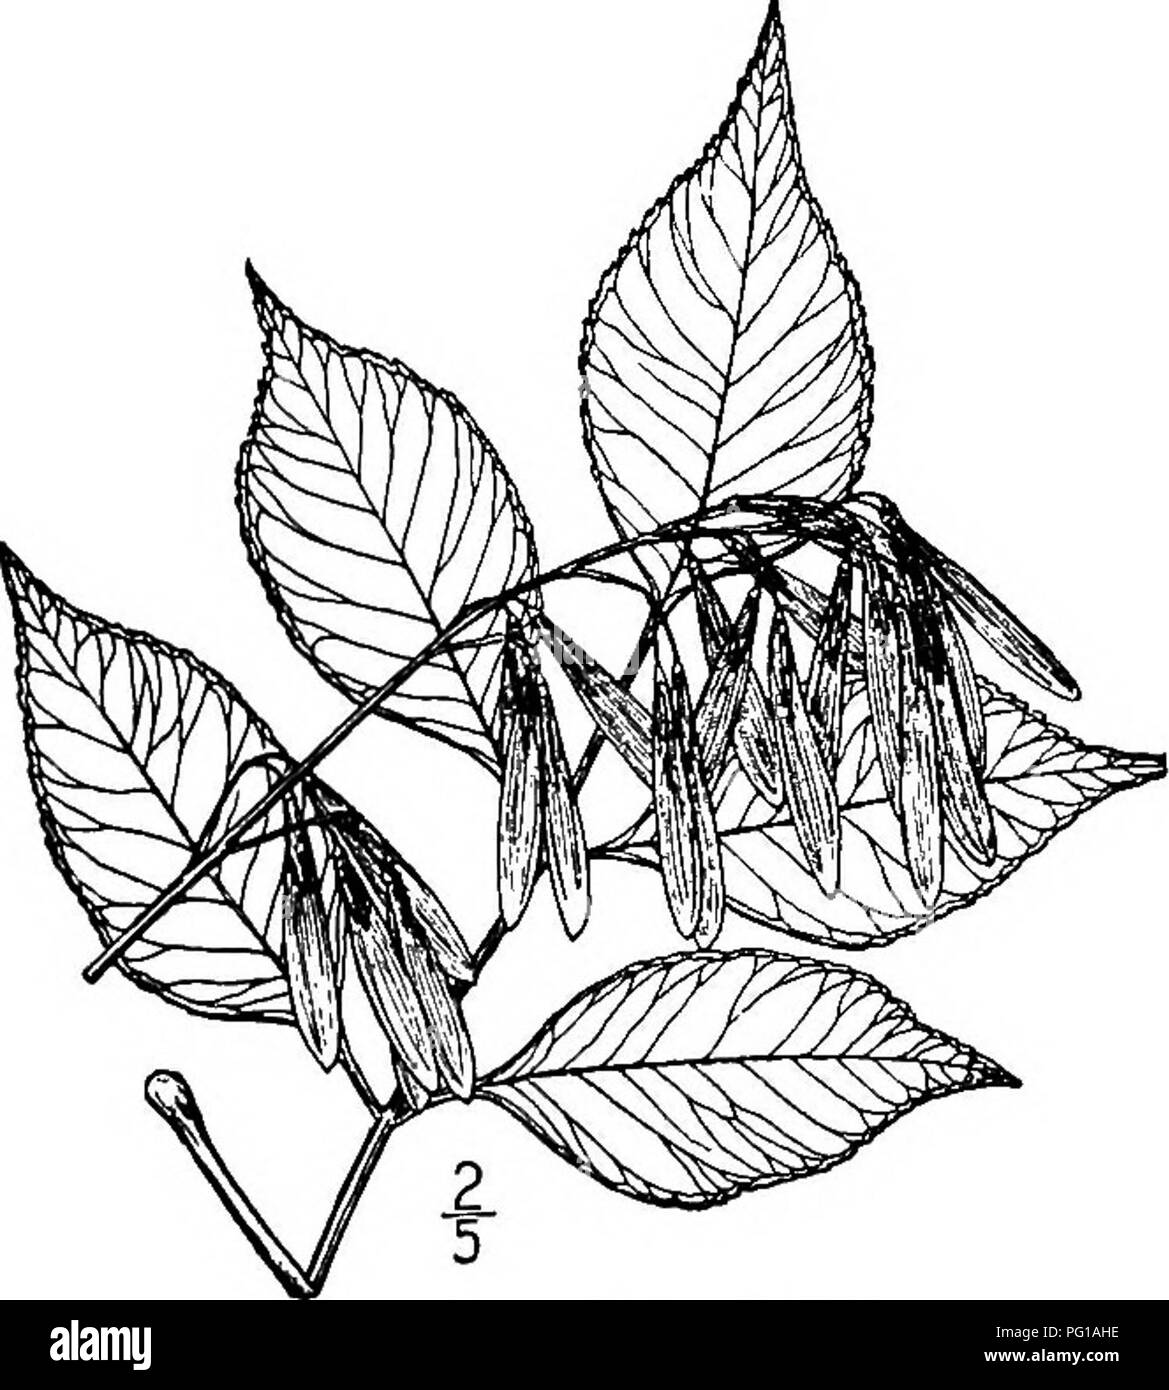 . North American trees : being descriptions and illustrations of the trees growing independently of cultivation in North America, north of Mexico and the West Indies . Trees. Texas Ash 807 ovate to oblong or ovate-orbicular, 5 to 8 cm. long, 2.5 to 5 cm. wide, long-stalked, strongly veined, toothed from the apex nearly to the base, and vary from abruptly pointed at the tip and wedge-shaped at the base to rounded or blunt at both ends; the upper surface is bright green and smooth, the under side paler and when young often hairy. The dioecious flowers appear with or just before the leaves of the Stock Photo